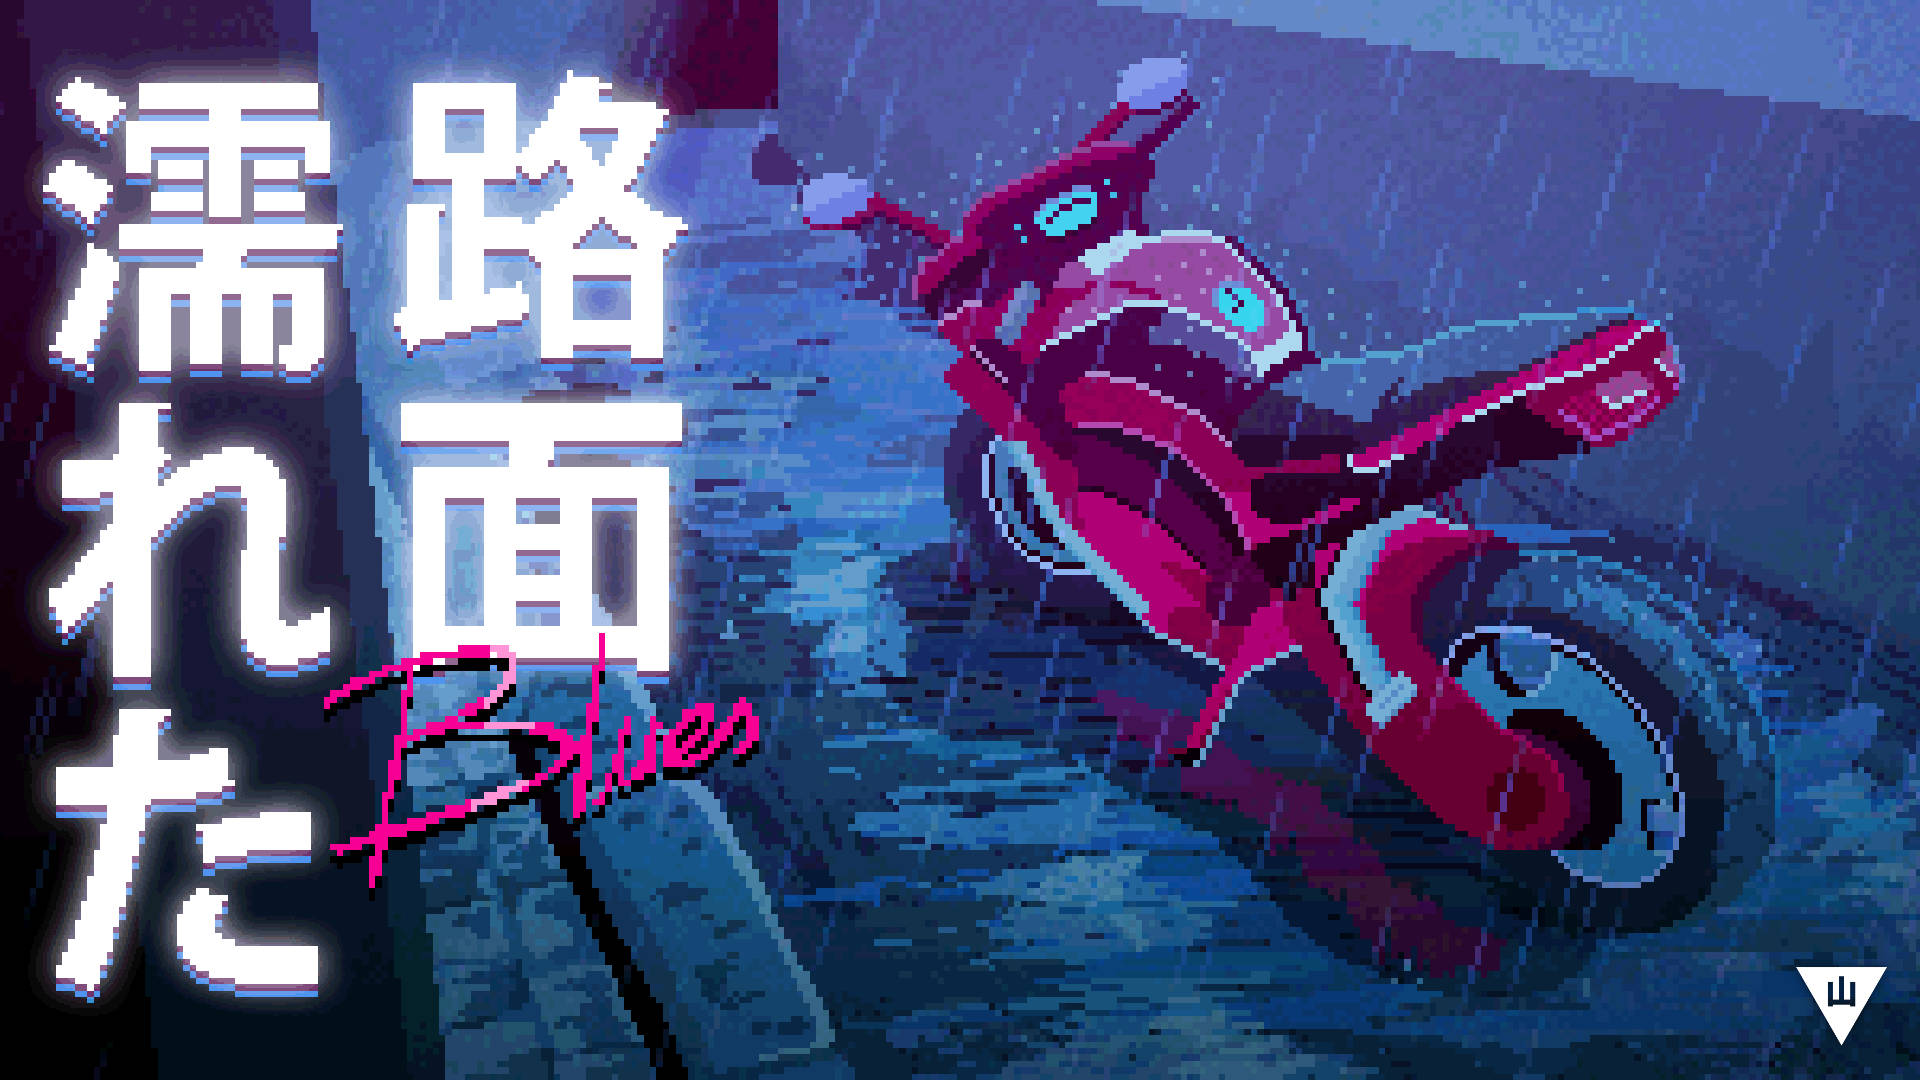 Get revved up with this retro pixel art motorcycle Wallpaper